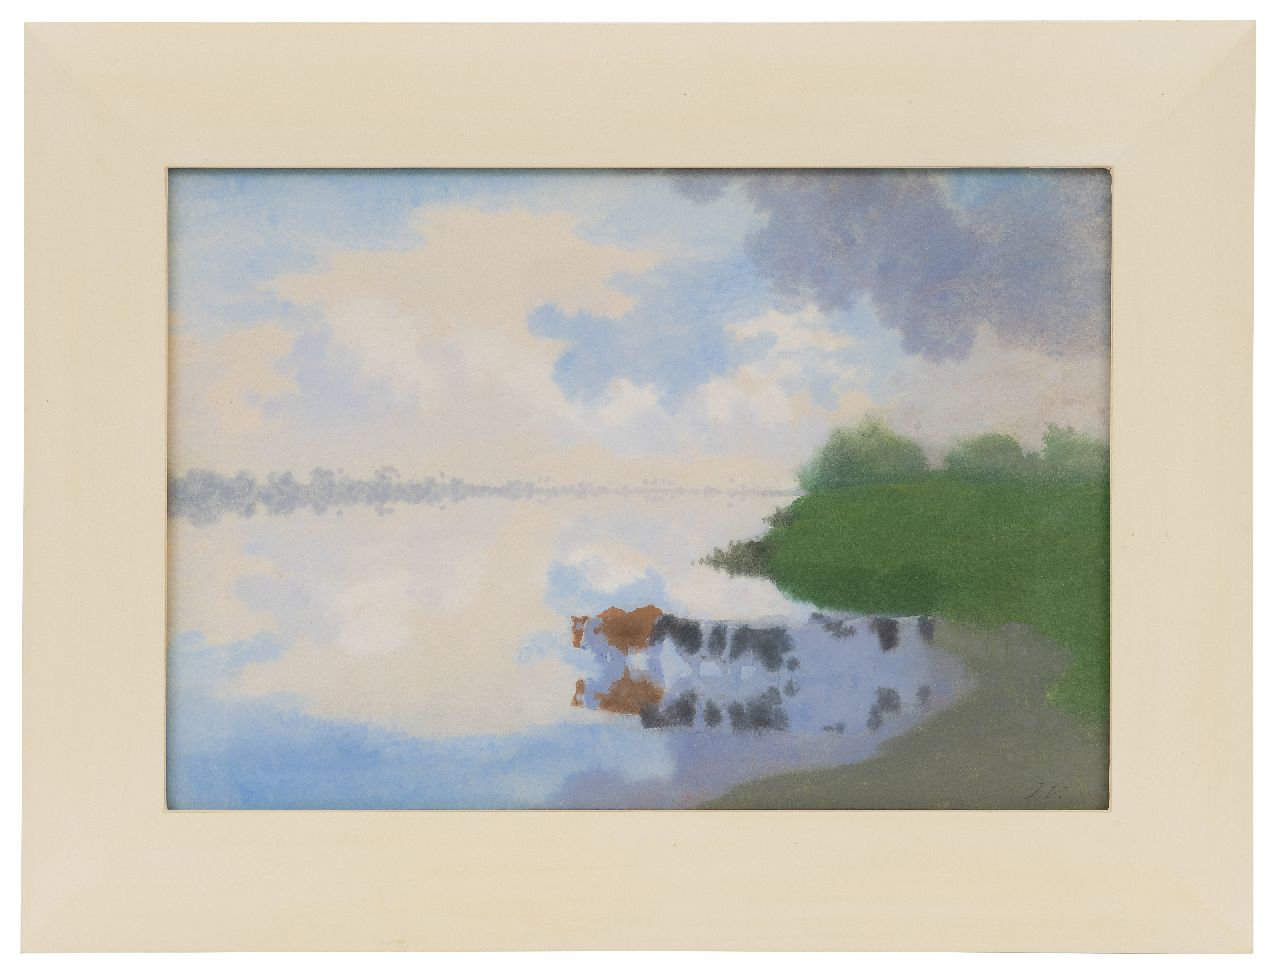 Voerman sr. J.  | Jan Voerman sr. | Watercolours and drawings offered for sale | Wading cattle, watercolour on paper 27.3 x 39.7 cm, signed l.r. with initials and painted ca. 1884-1904